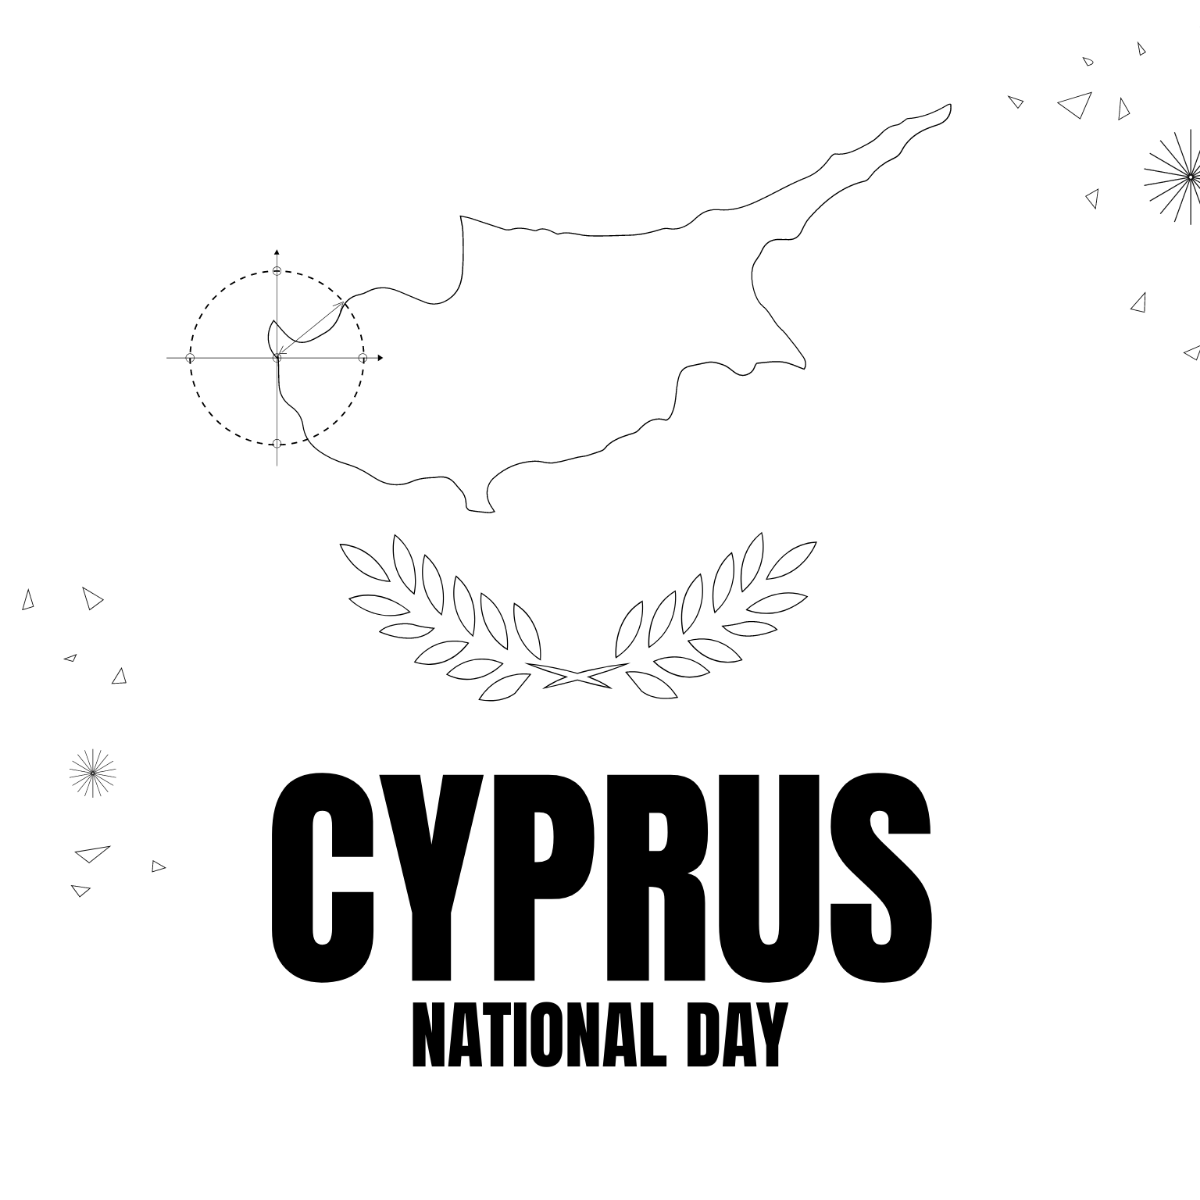 Cyprus National Day Outline Template